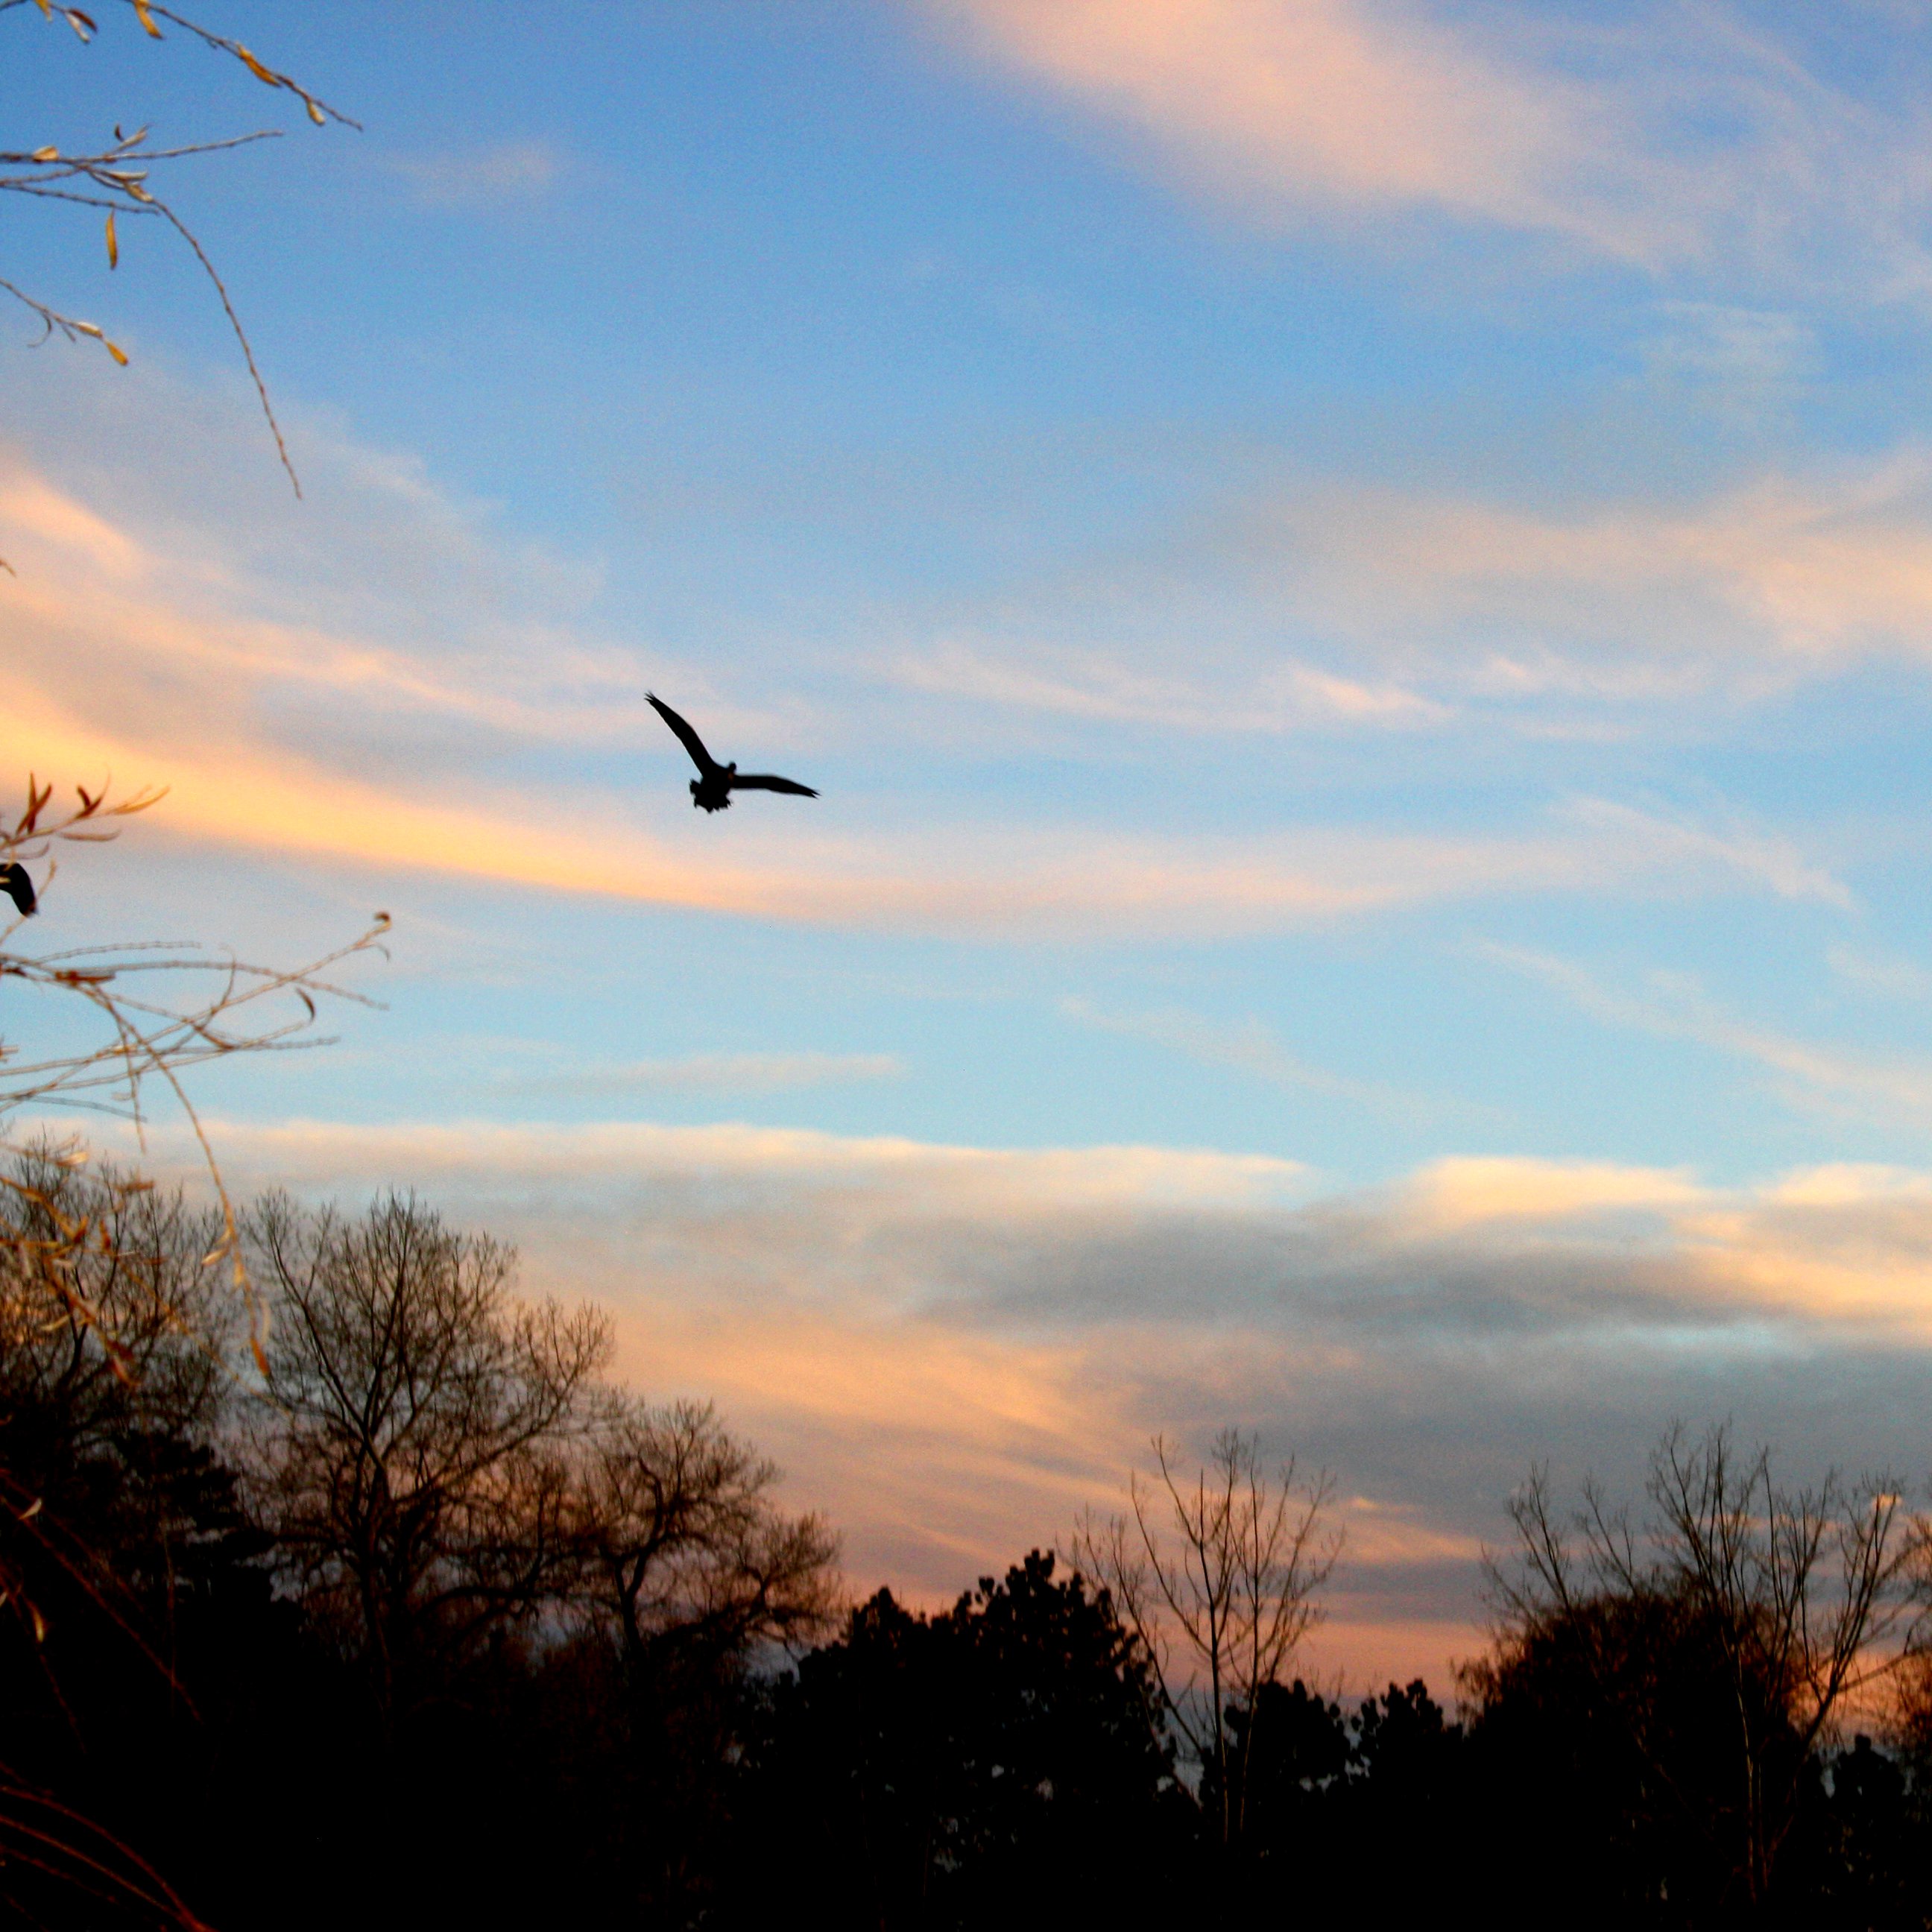 Flying Bird at Sunset Picture | Free Photograph | Photos Public Domain